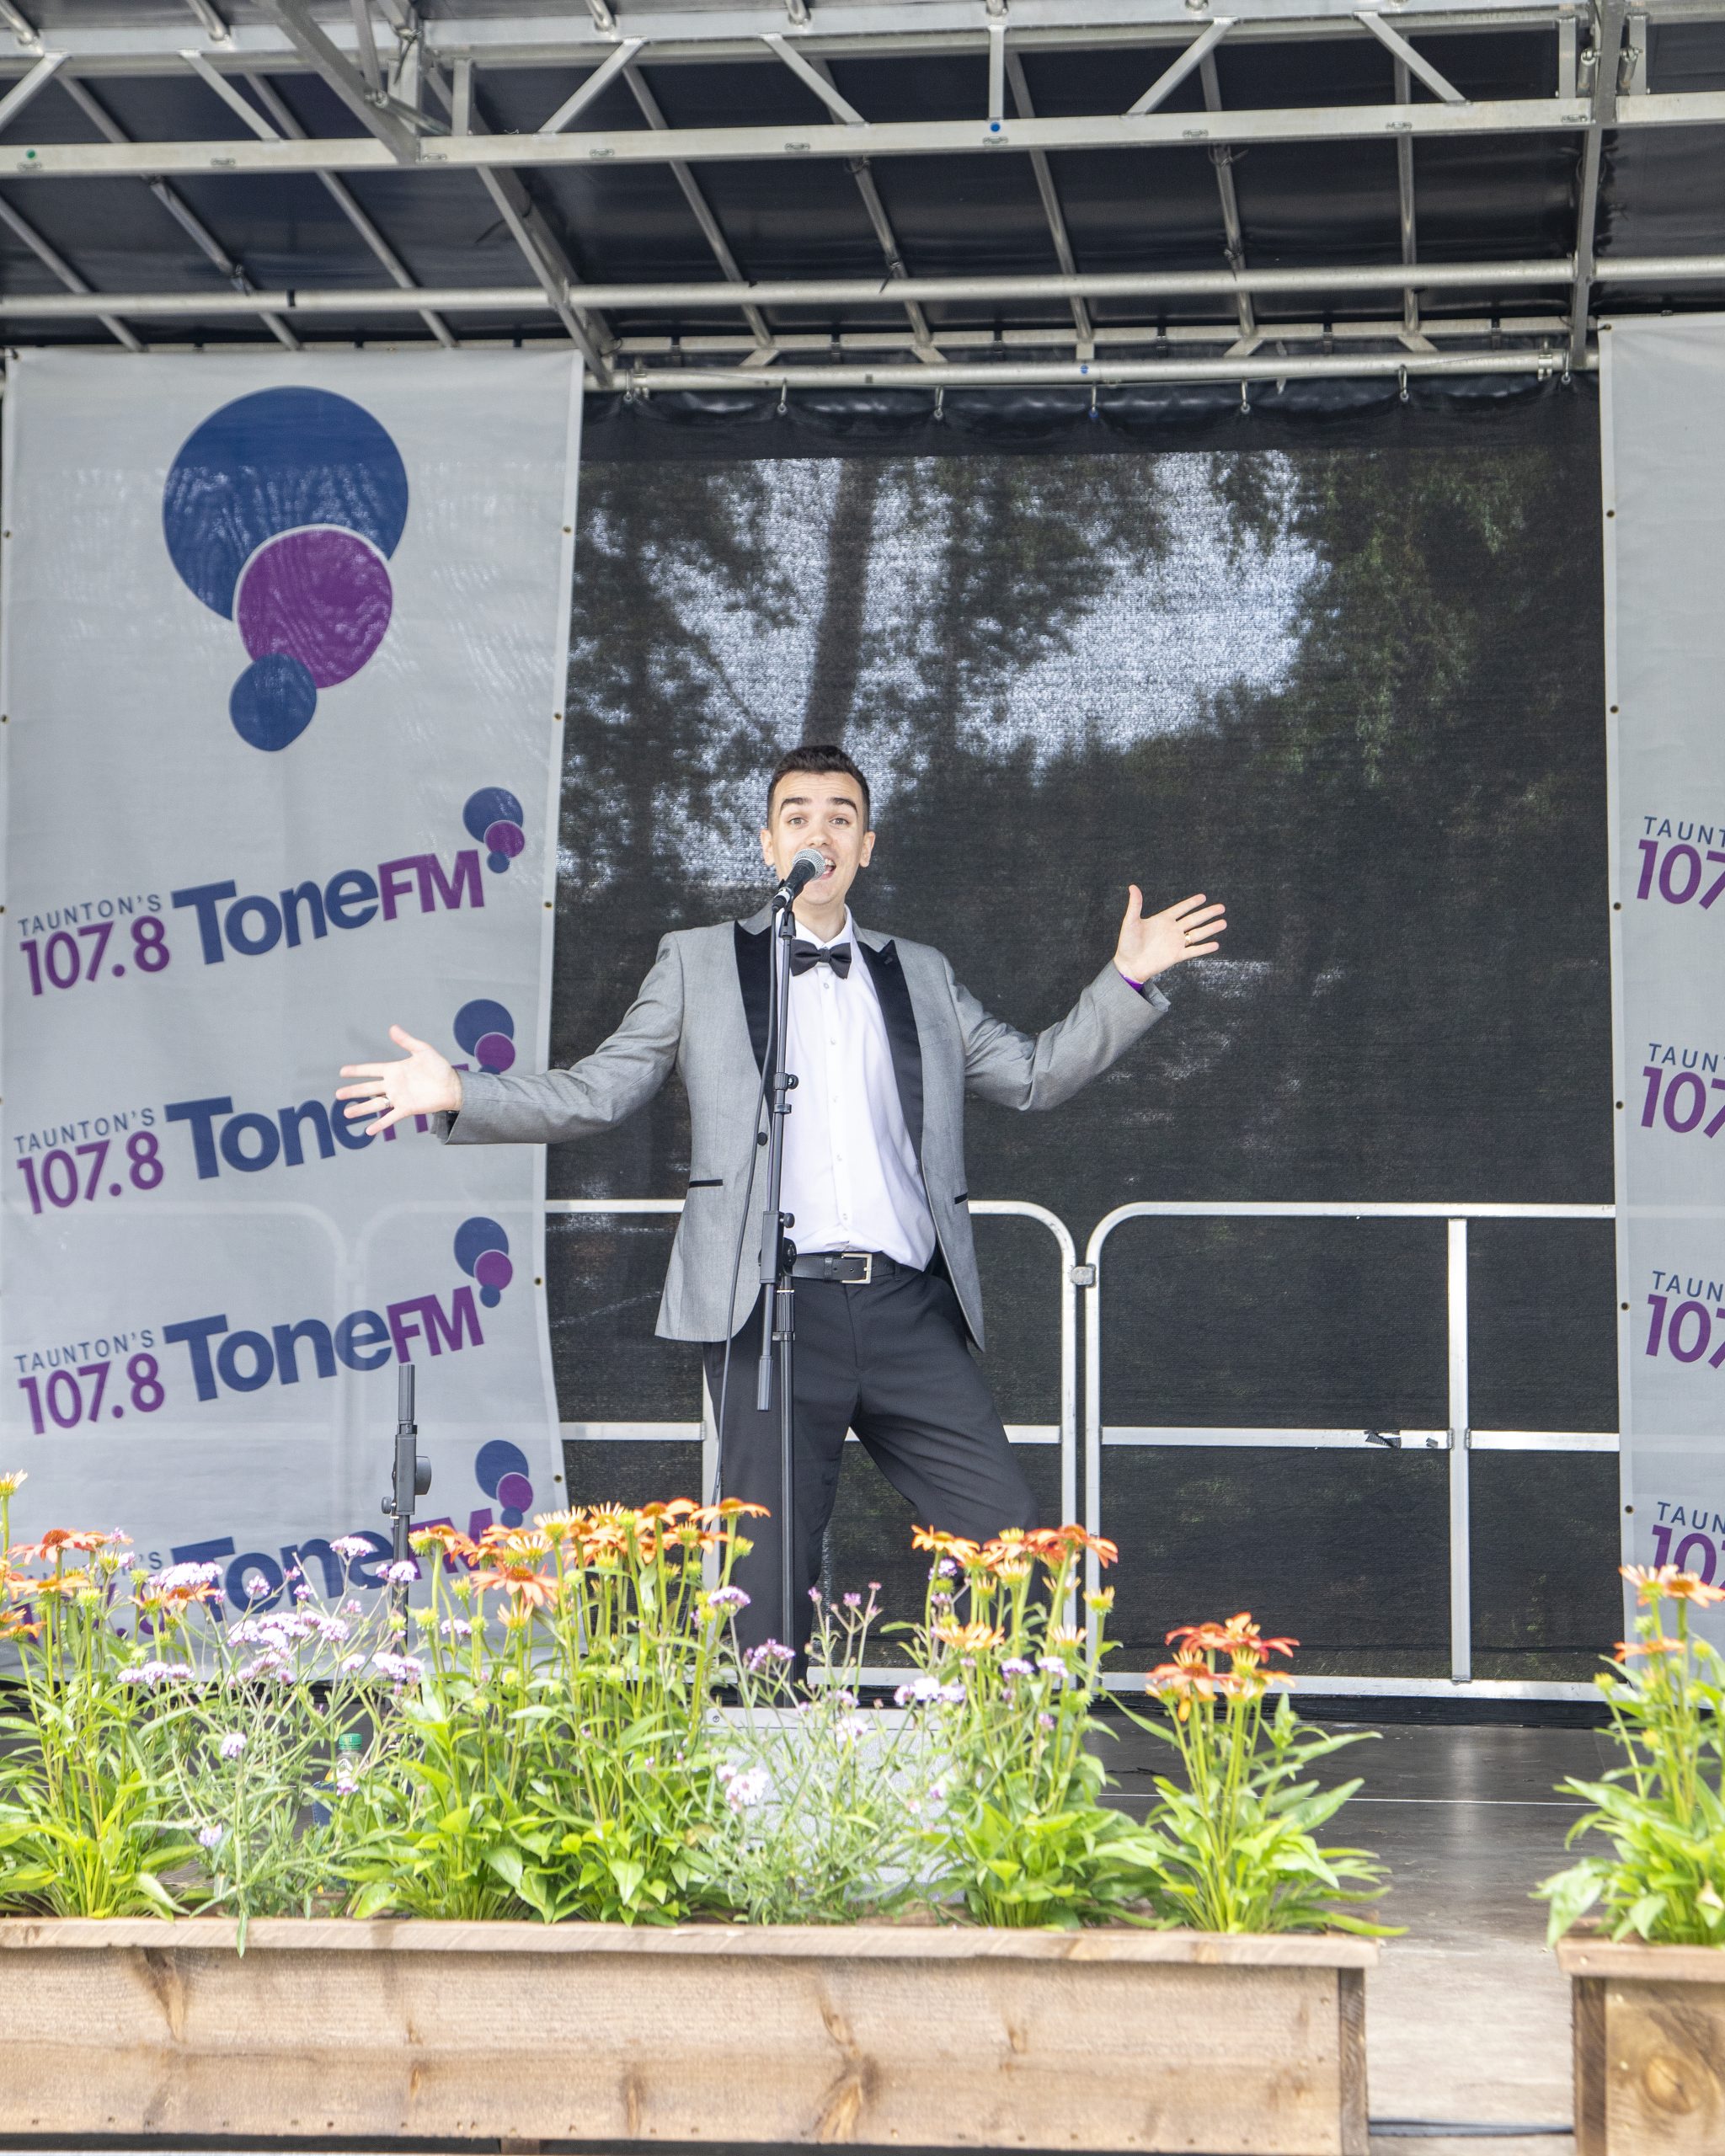 Cameron Lemmer performing on the ToneFM stage